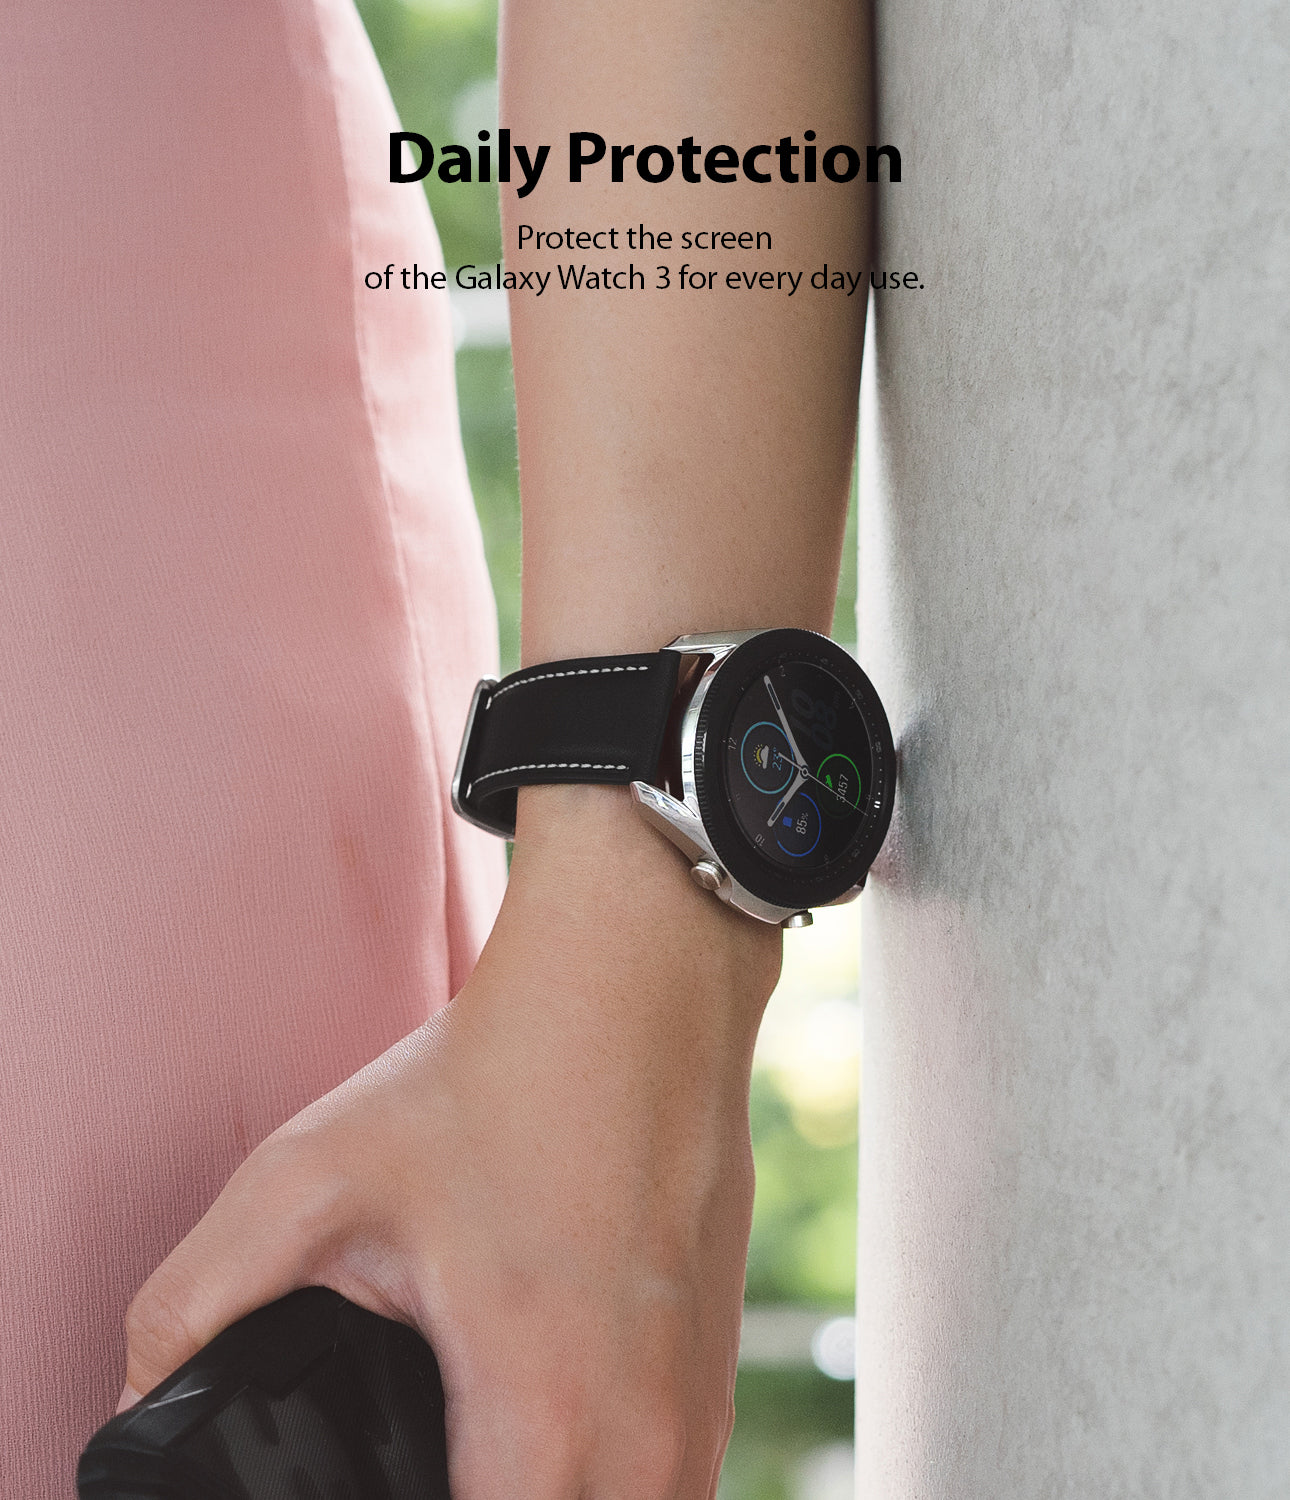 protect the screen of the galaxy watch 3 for everyday use